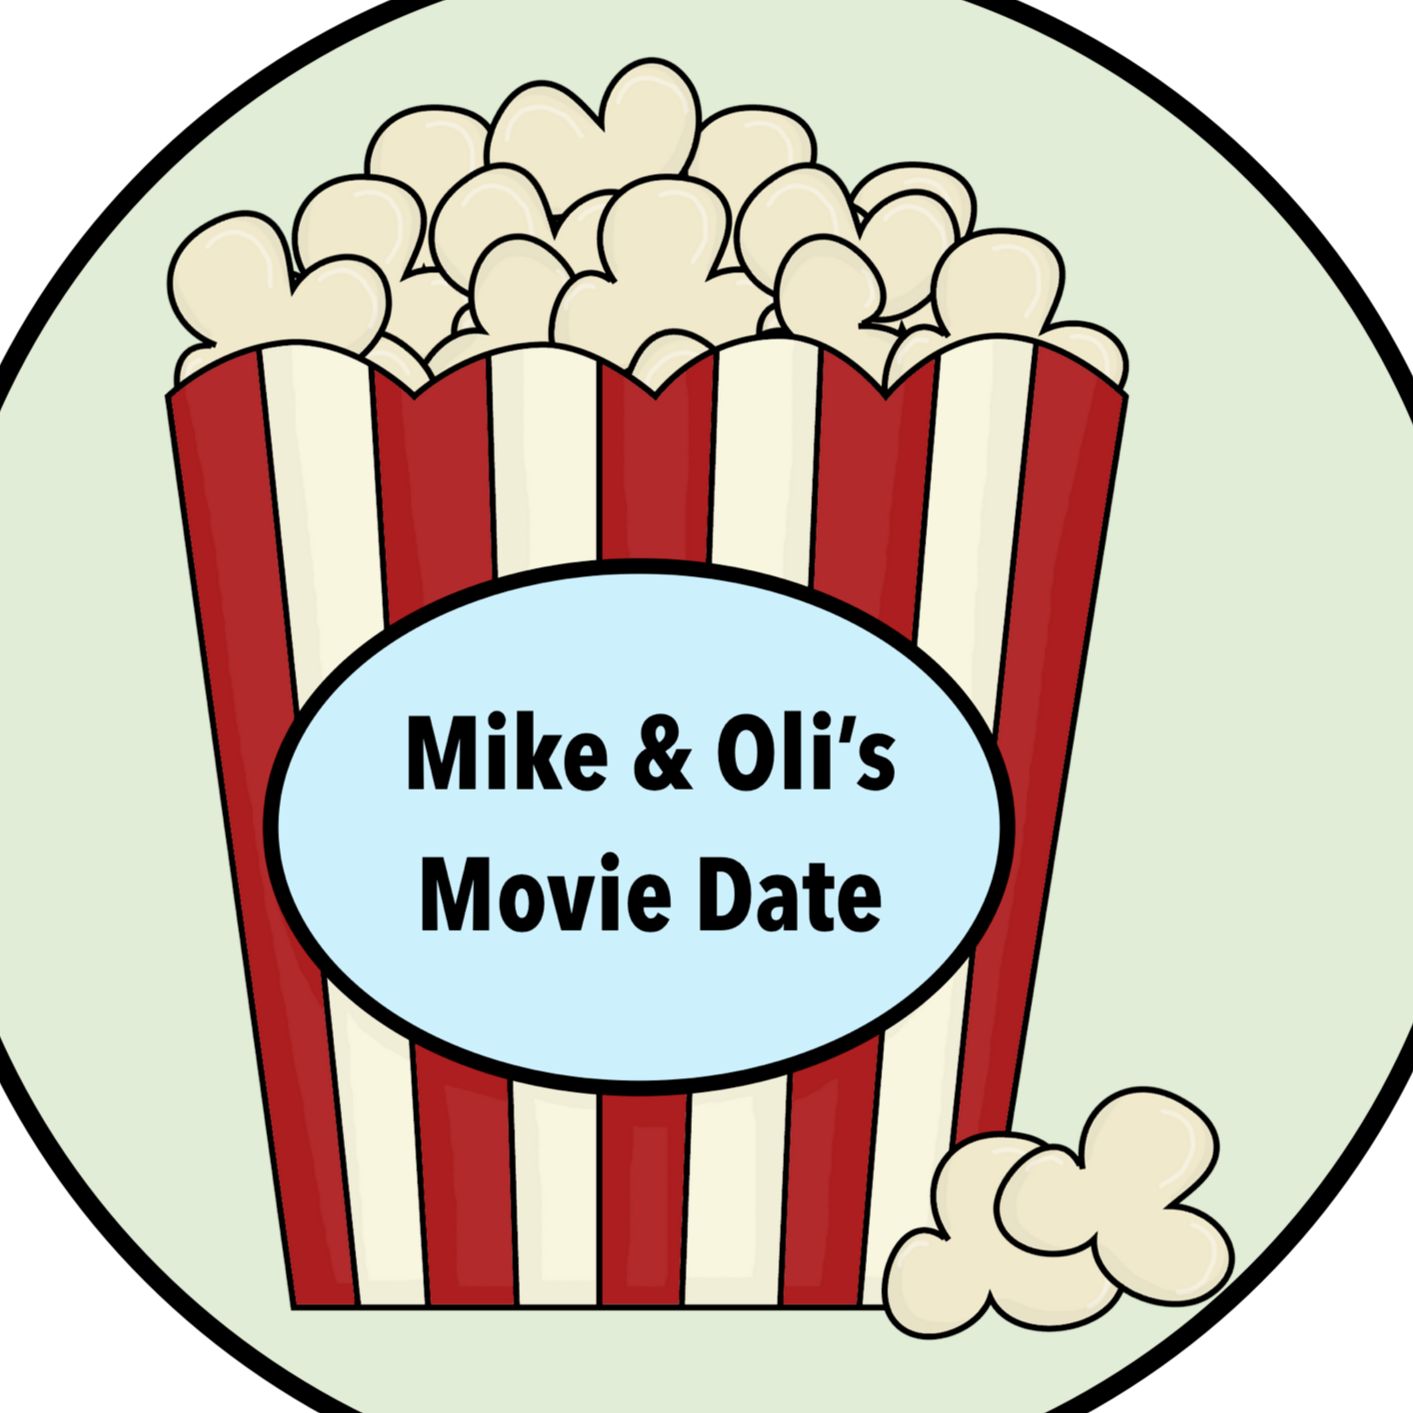 Mike and Oli's Movie Date